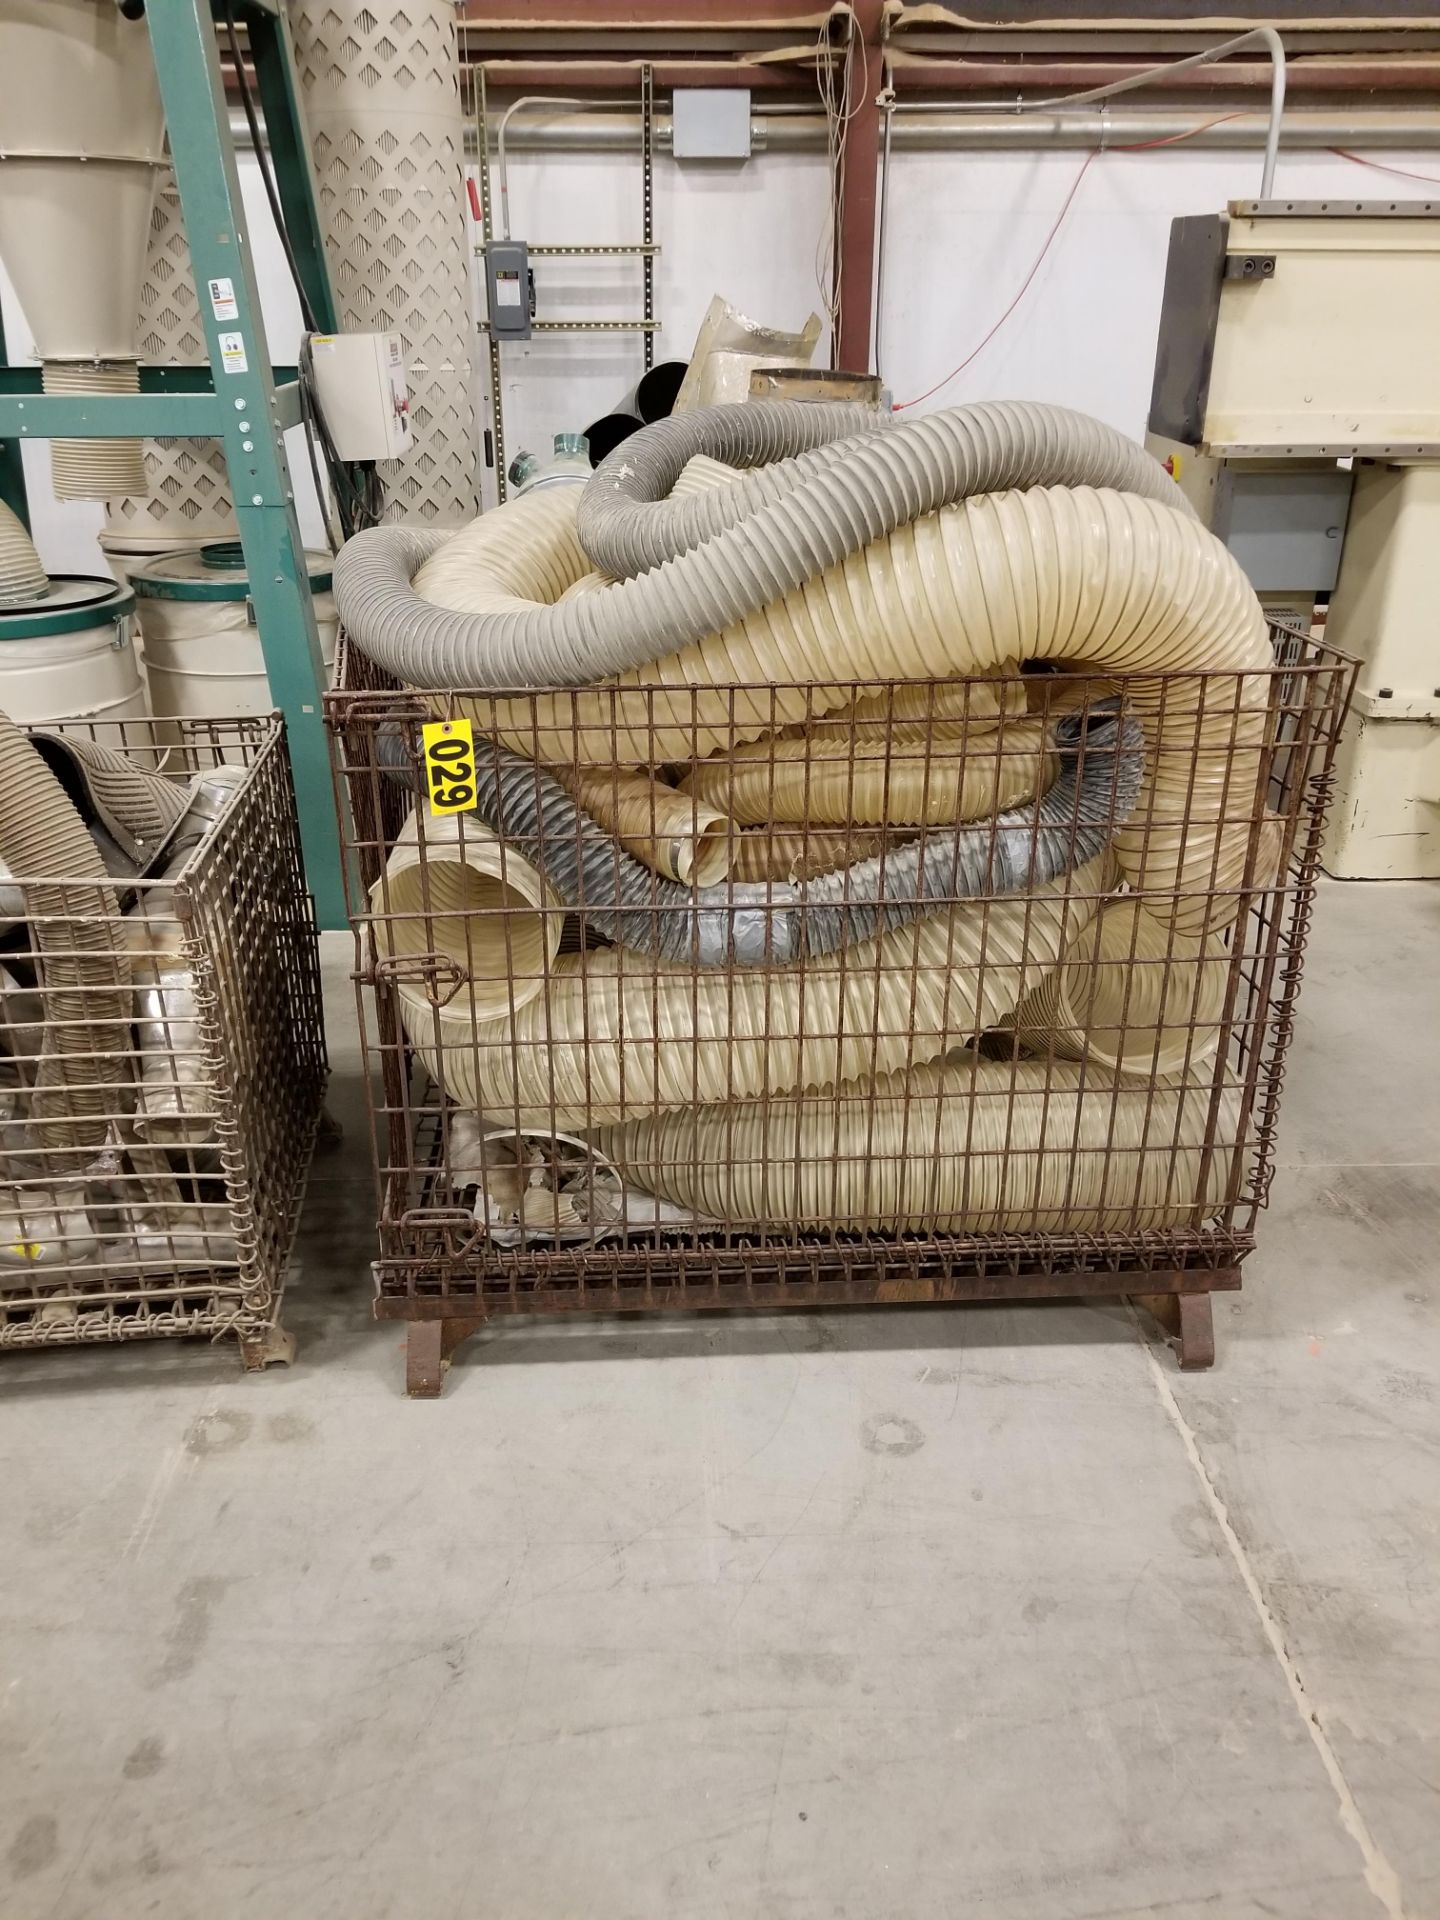 Wire bin w/ misc dust collection hoses